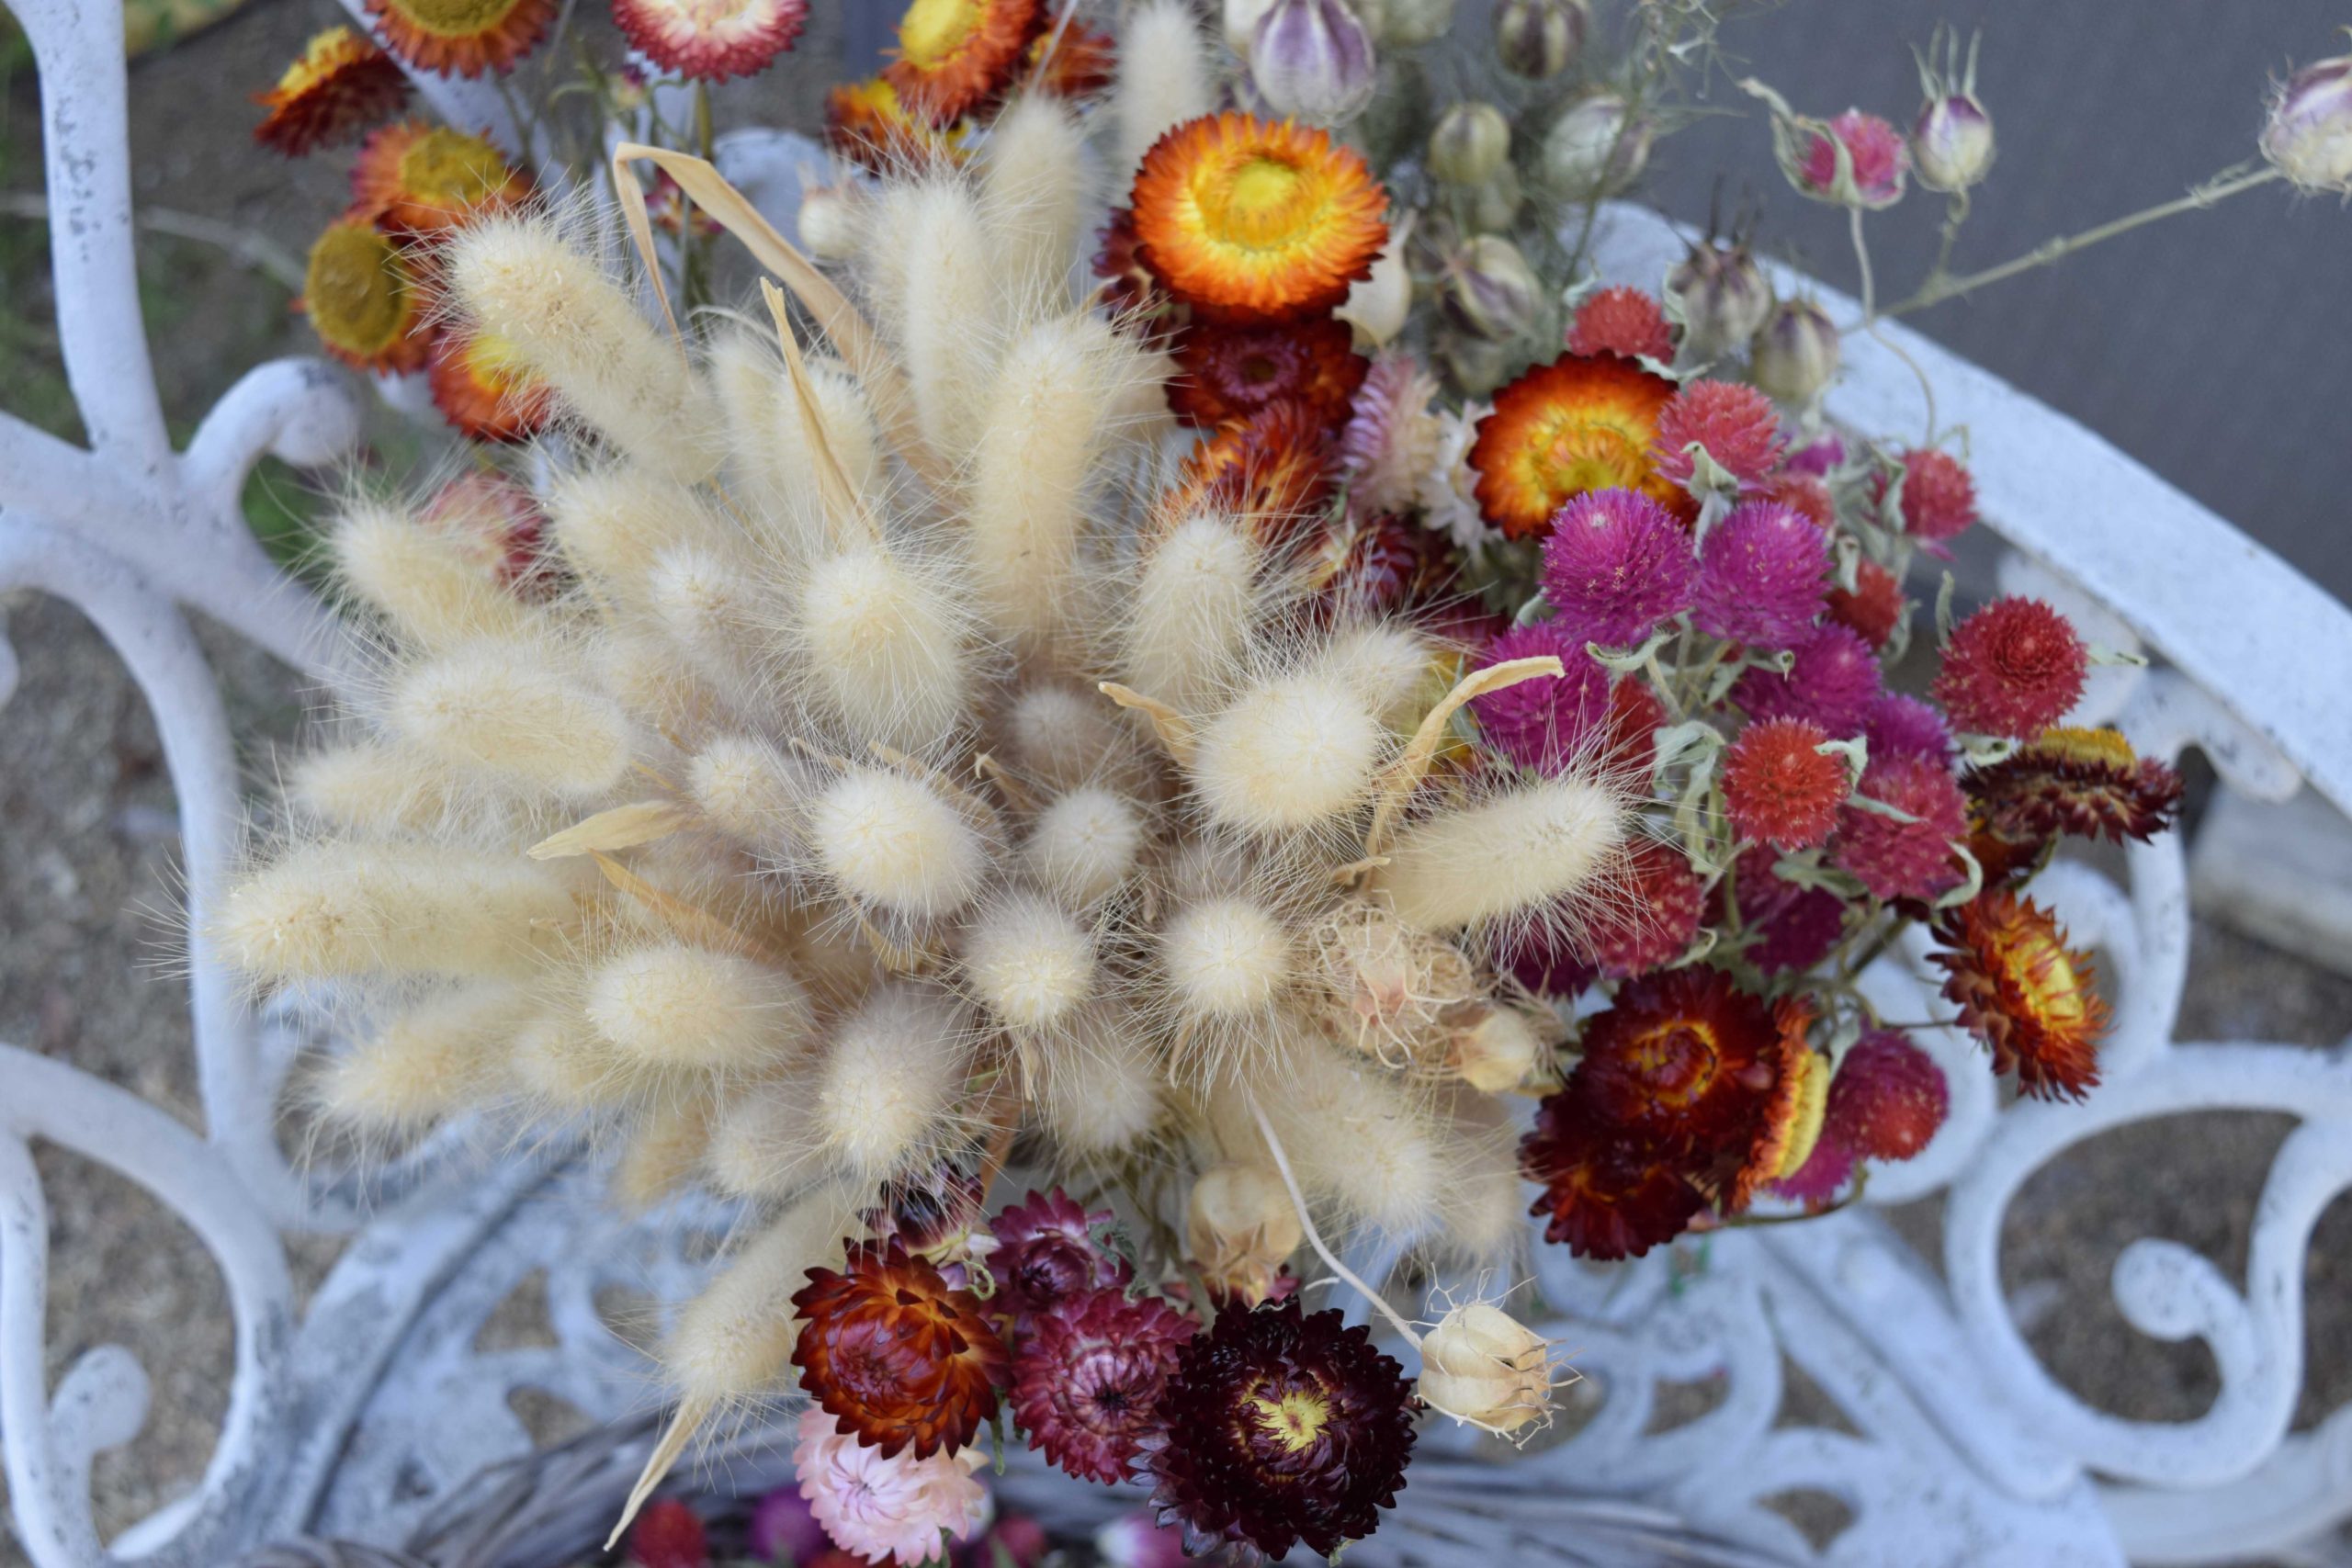 https://freckledcalifornian.com/wp-content/uploads/2020/11/easy-everlastings-to-grow-such-as-bunny-tail-grass-globe-amaranth-and-strawflower-scaled.jpg